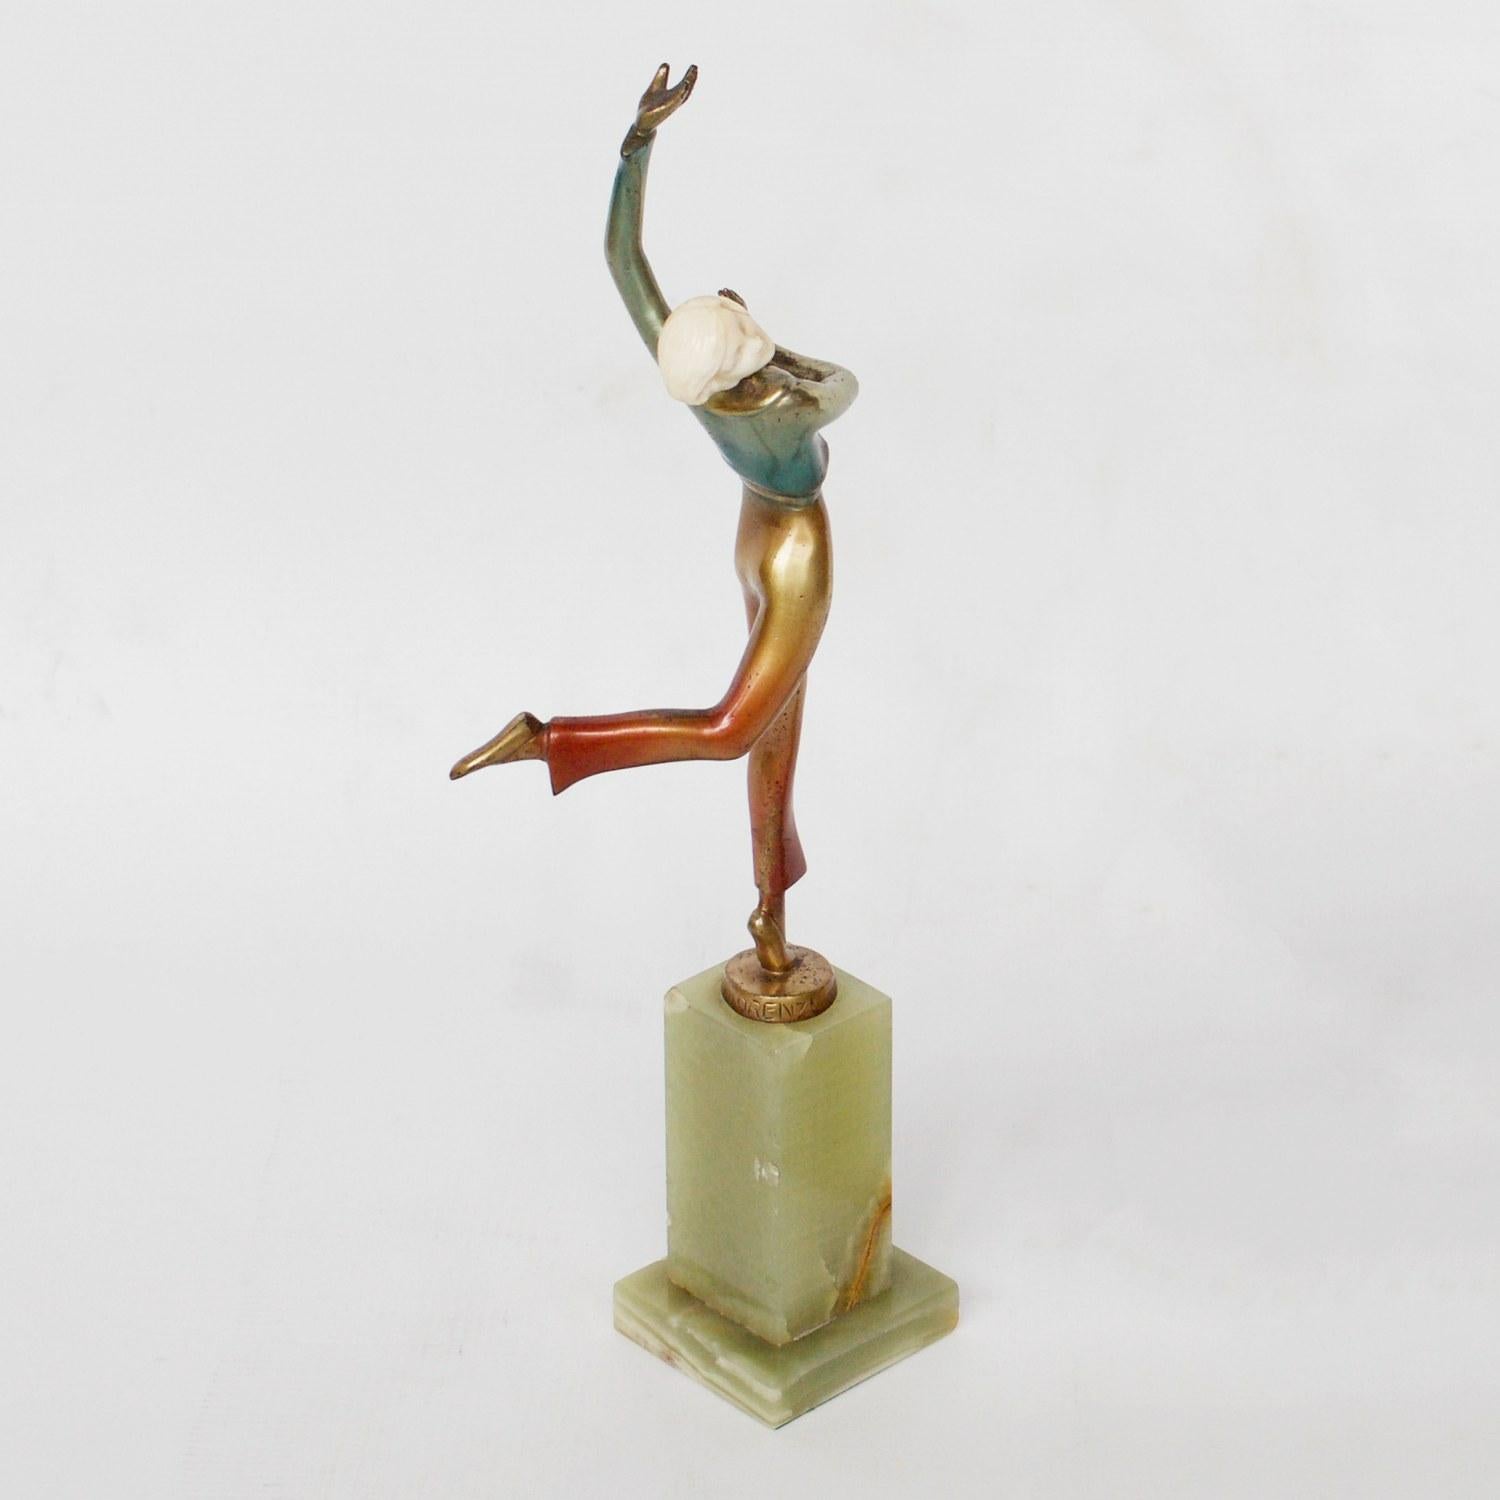 An Art Deco, cold painted bronze figure of an elegant dancer dancing the Charleston with arms out stretched in an extravagant pose. Hand carved ivory head, raised on a green onyx base. Original enamel patination. 

Signed Lorenzl to